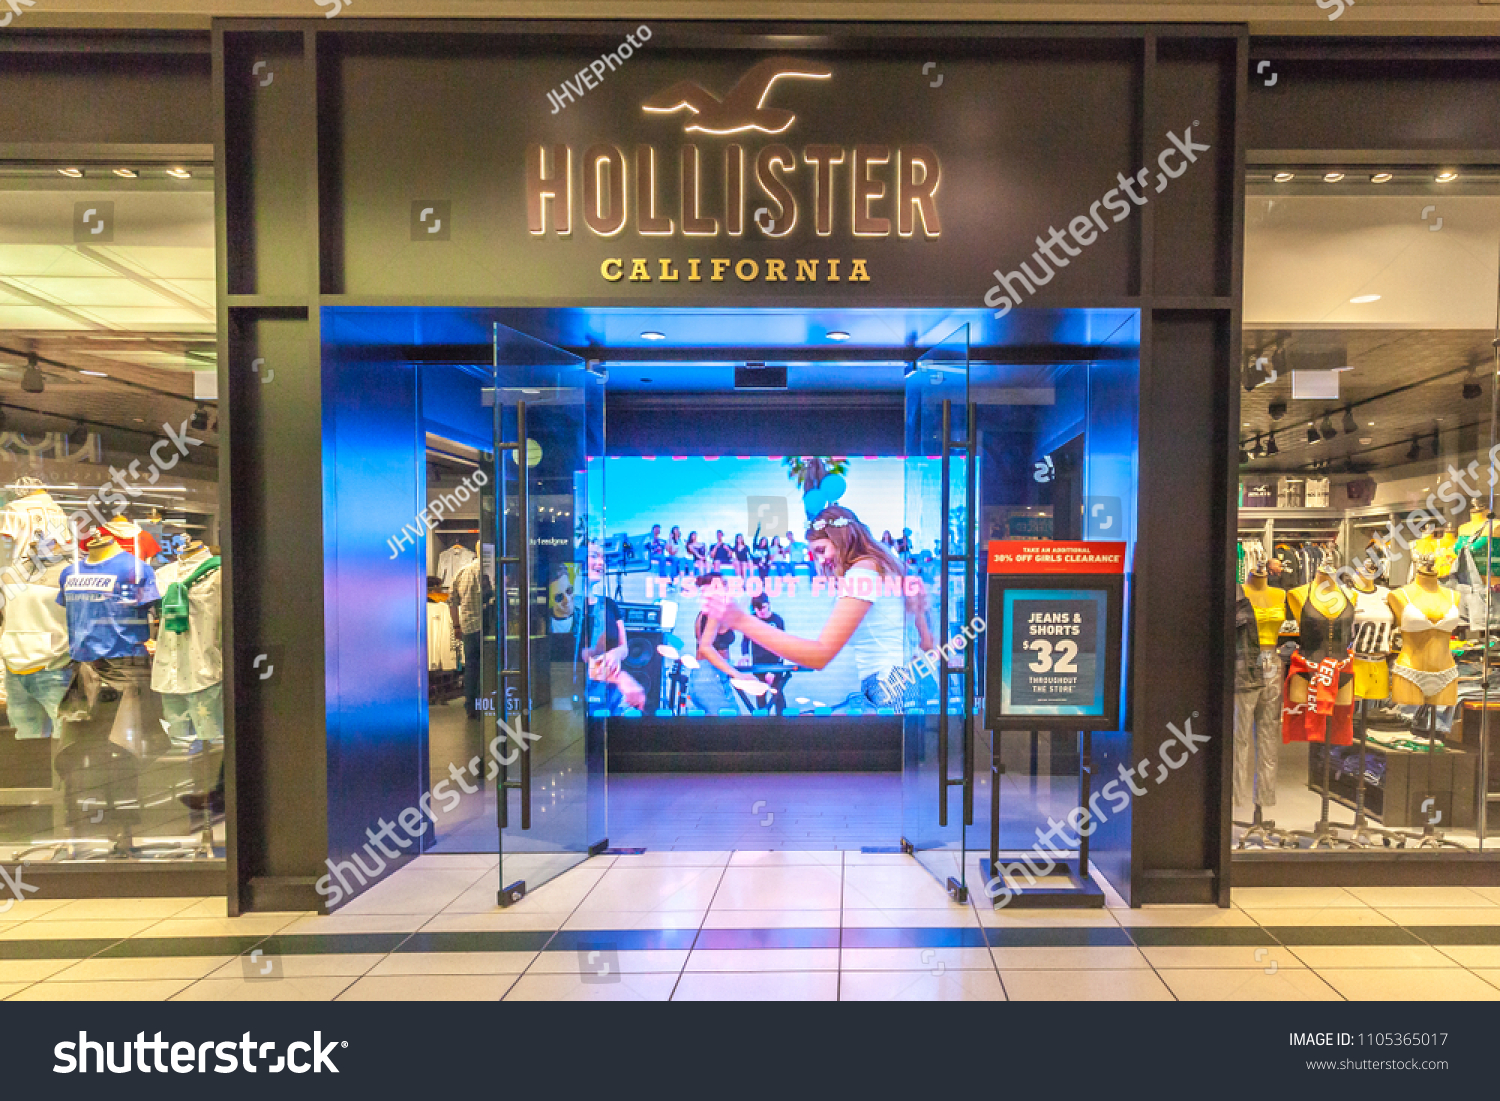 hollister store nearby